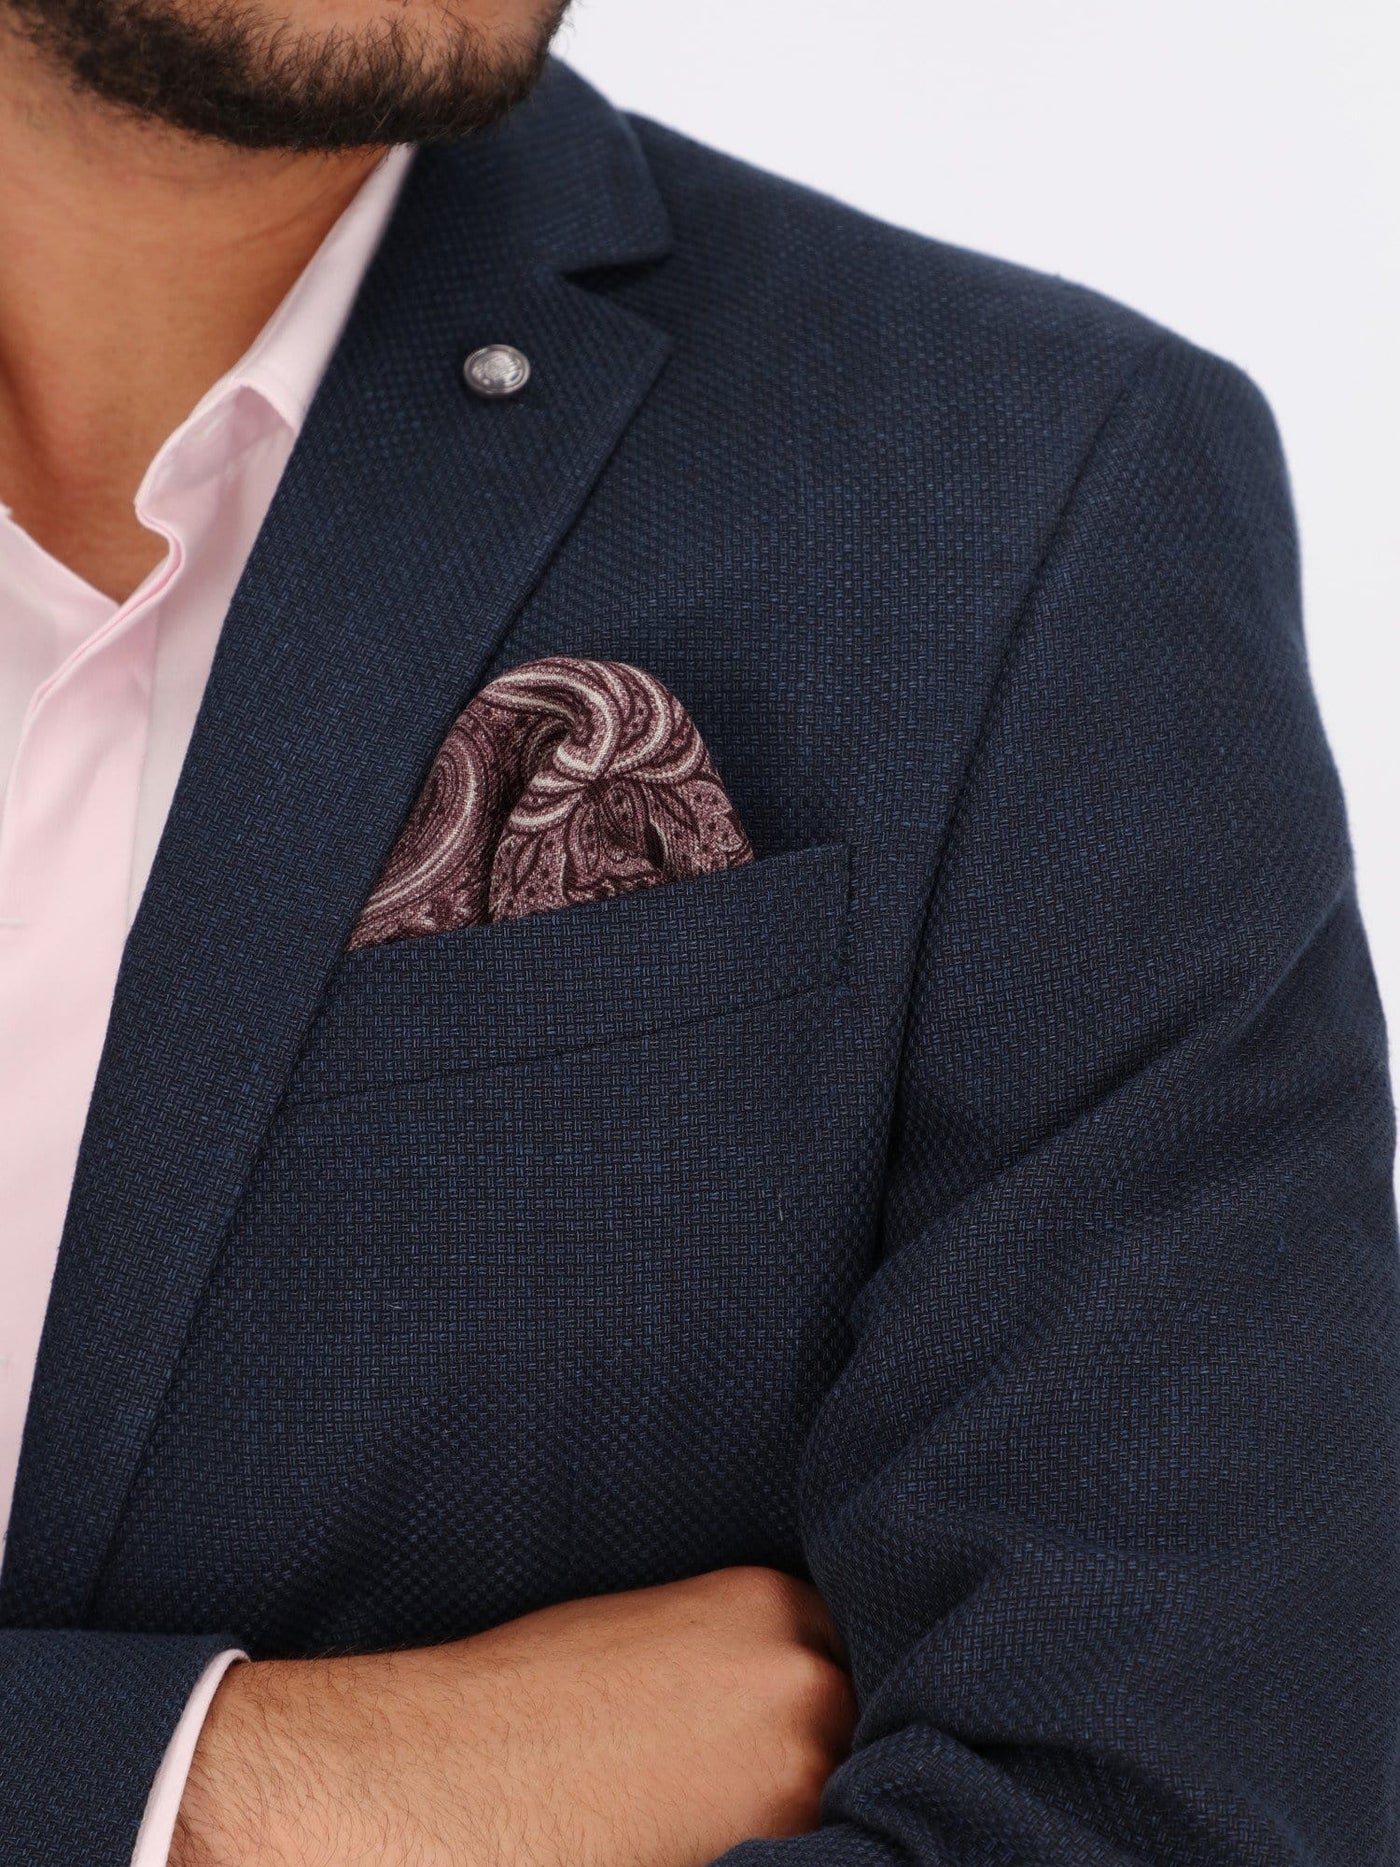 Daniel Hechter Other Accessories Chili Red / Os Pocket Square with Paisley Pattern